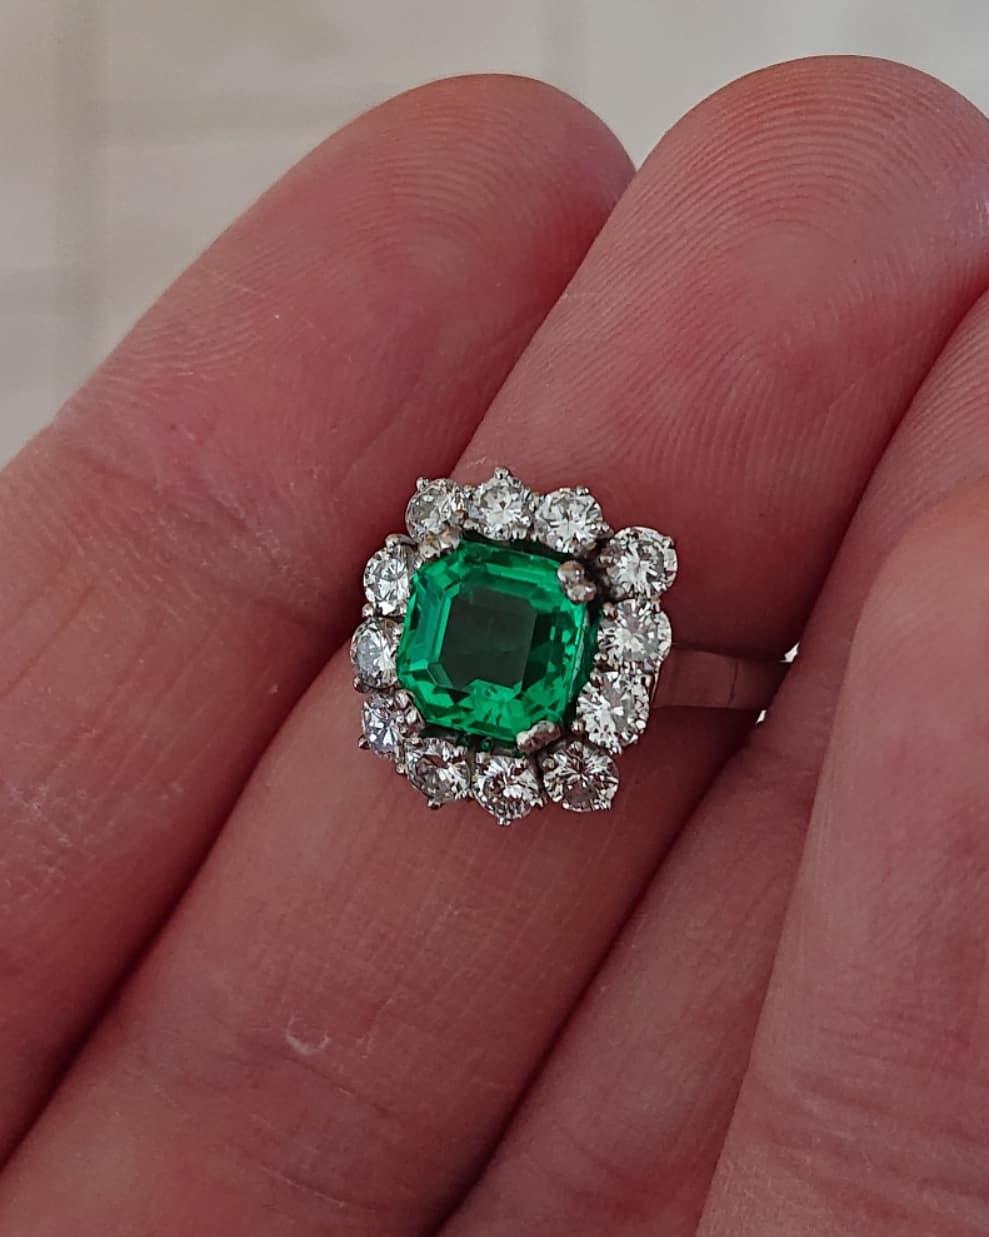 1.51 Carat Colombian Emerald Diamond and Platinum Cluster Ring with Certificate im Zustand „Gut“ in London, GB